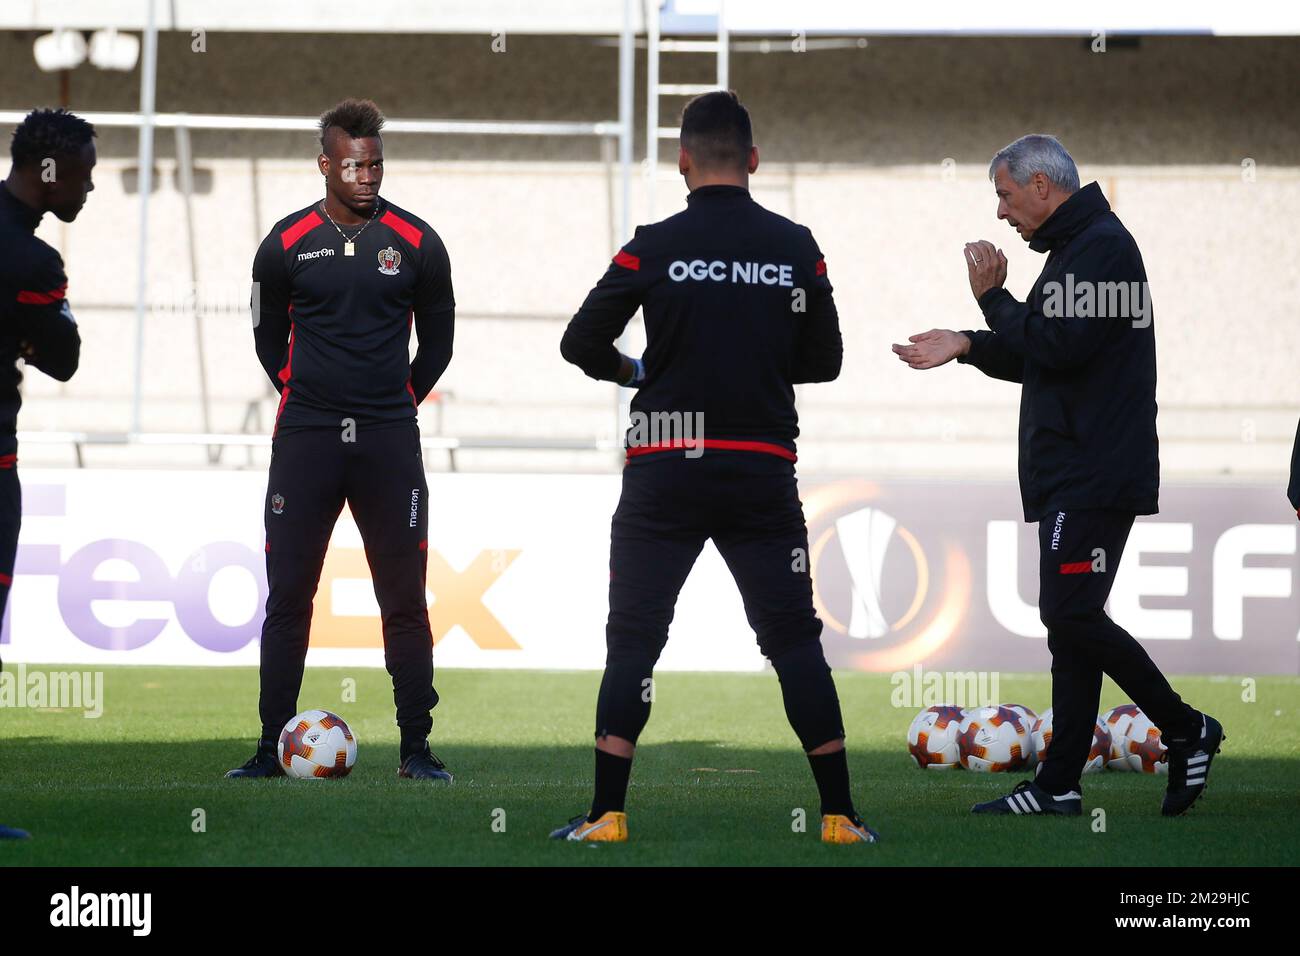 Nice' Mario Balotelli and Nice' head coach Lucien Favre pictured during a training session of French soccer club OGC Nice, Wednesday 13 September 2017 in Waregem. Tomorrow Nice is playing Belgian team SV Zulte Waregem on the first day of the group stage (Group K) of the Europa League tournament. BELGA PHOTO BRUNO FAHY Stock Photo